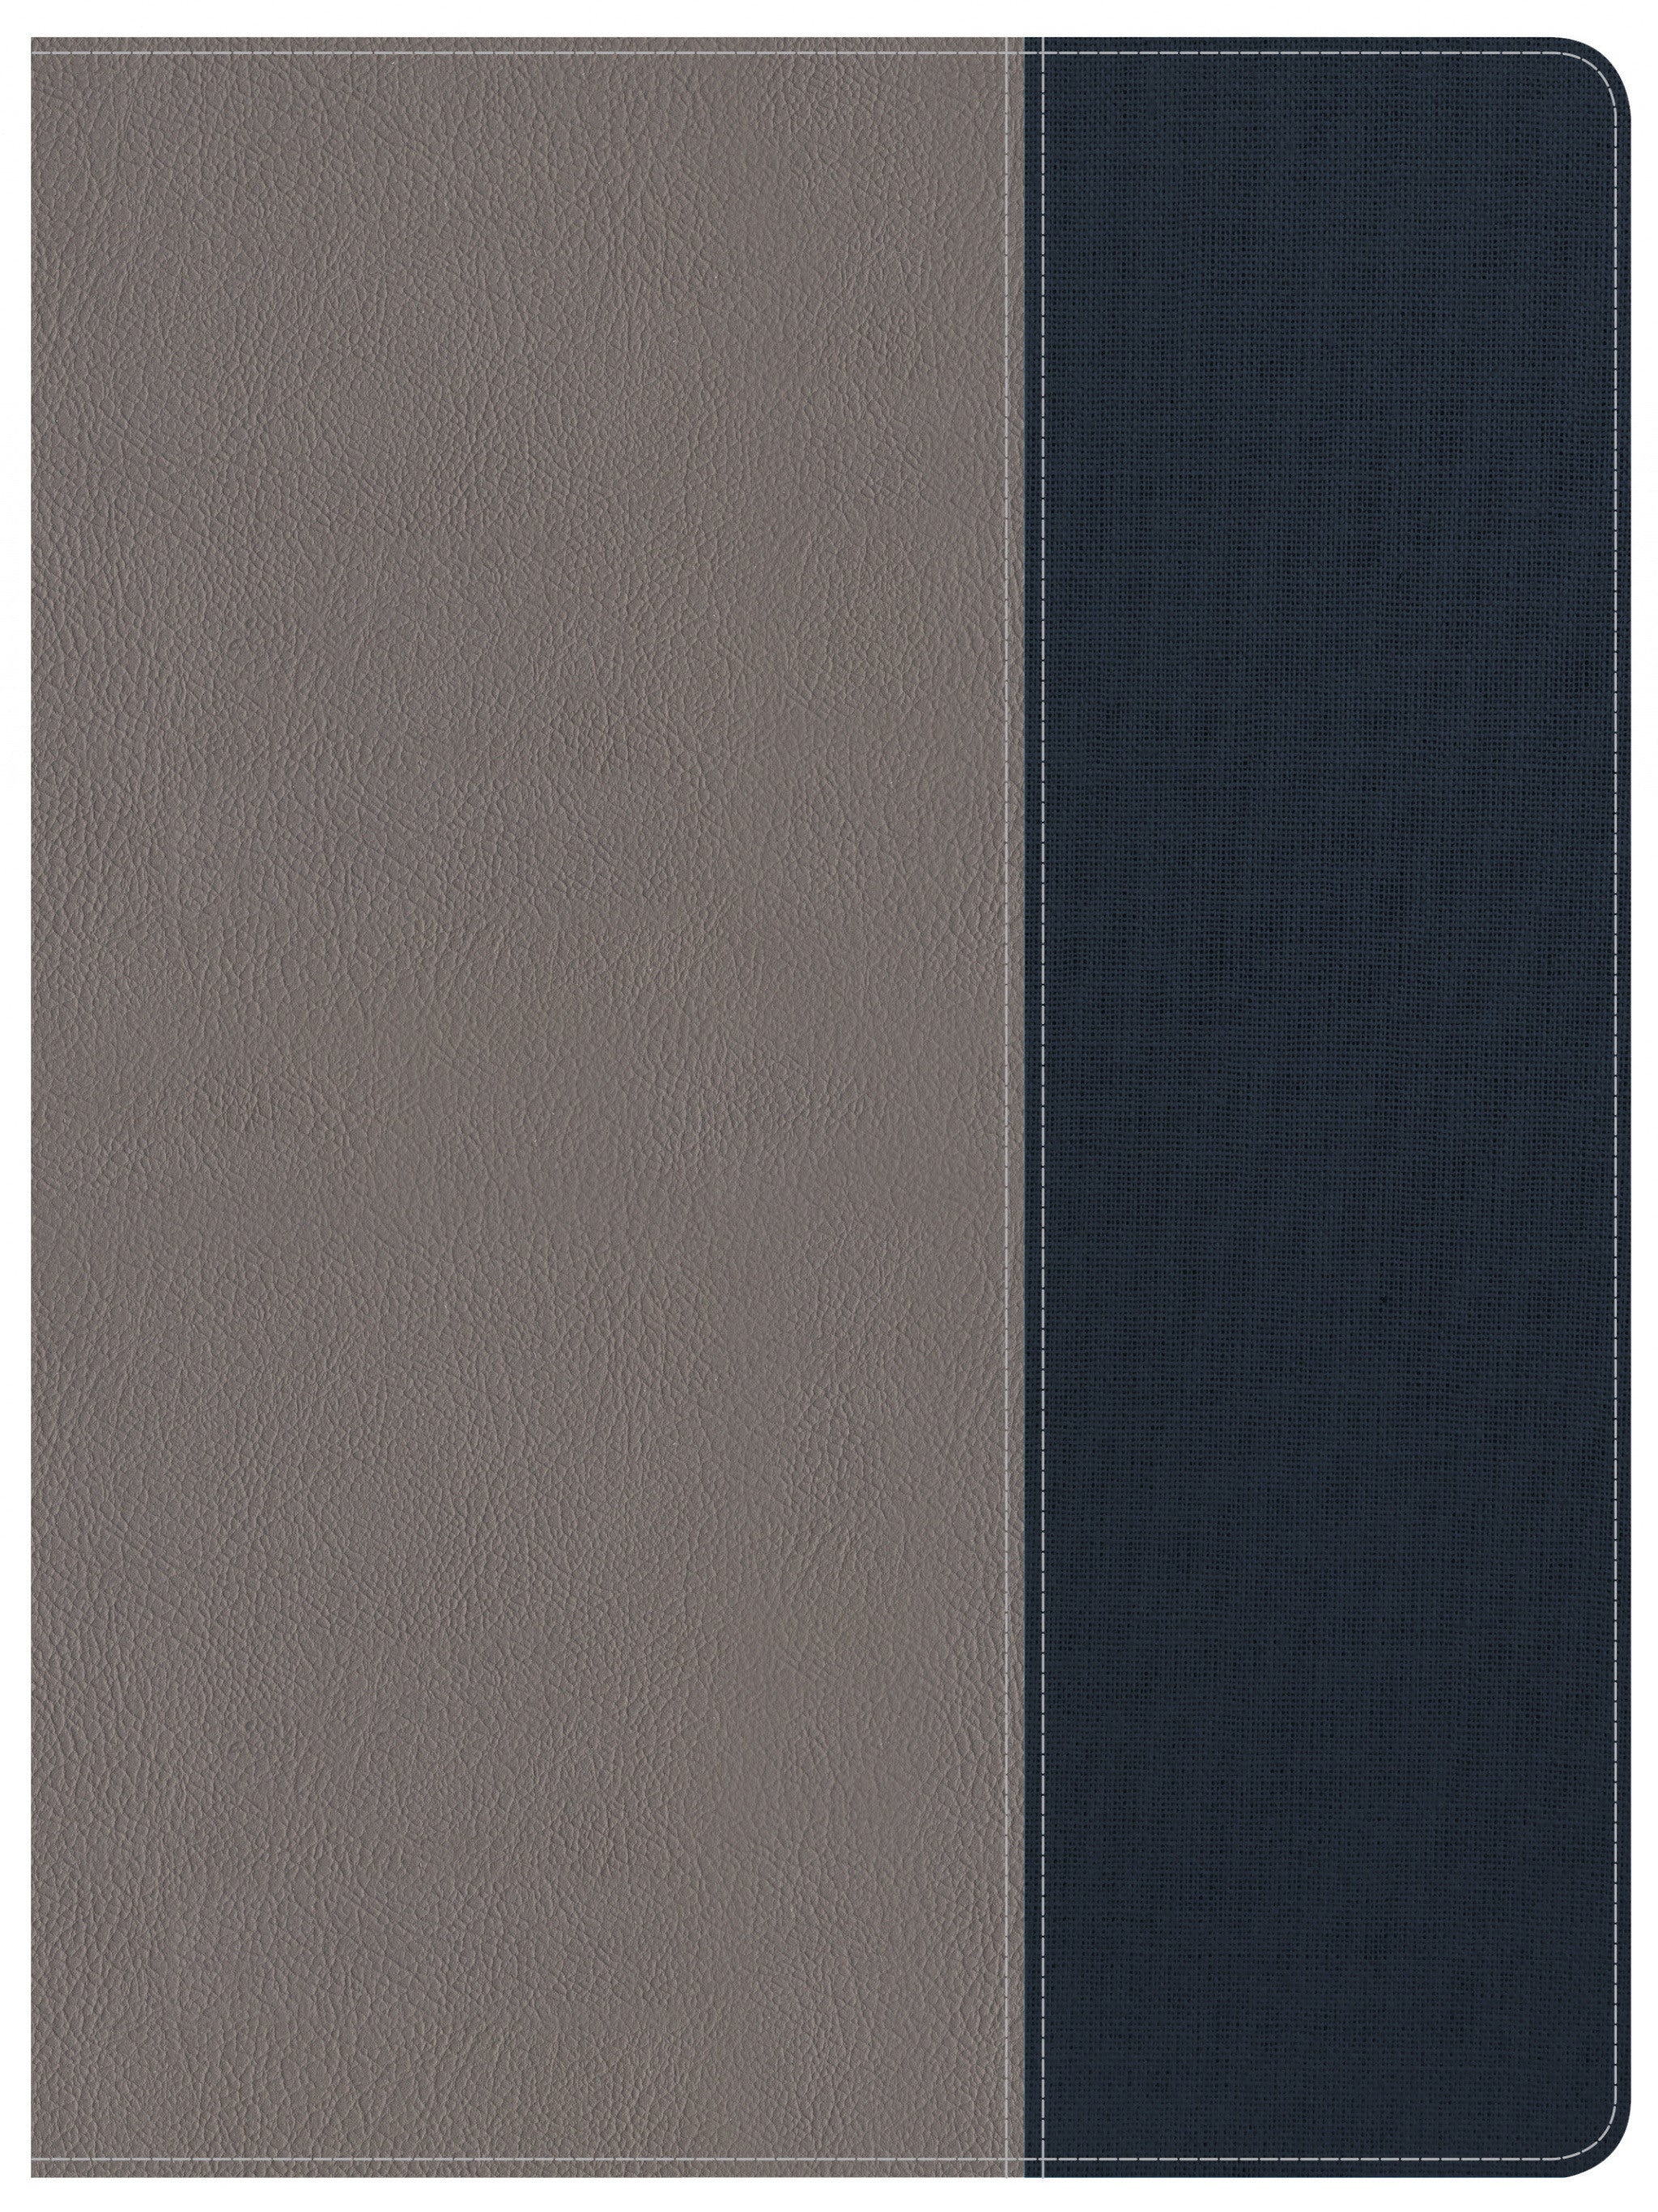 Image of CSB Apologetics Study Bible For Students, Gray/Navy Leather other